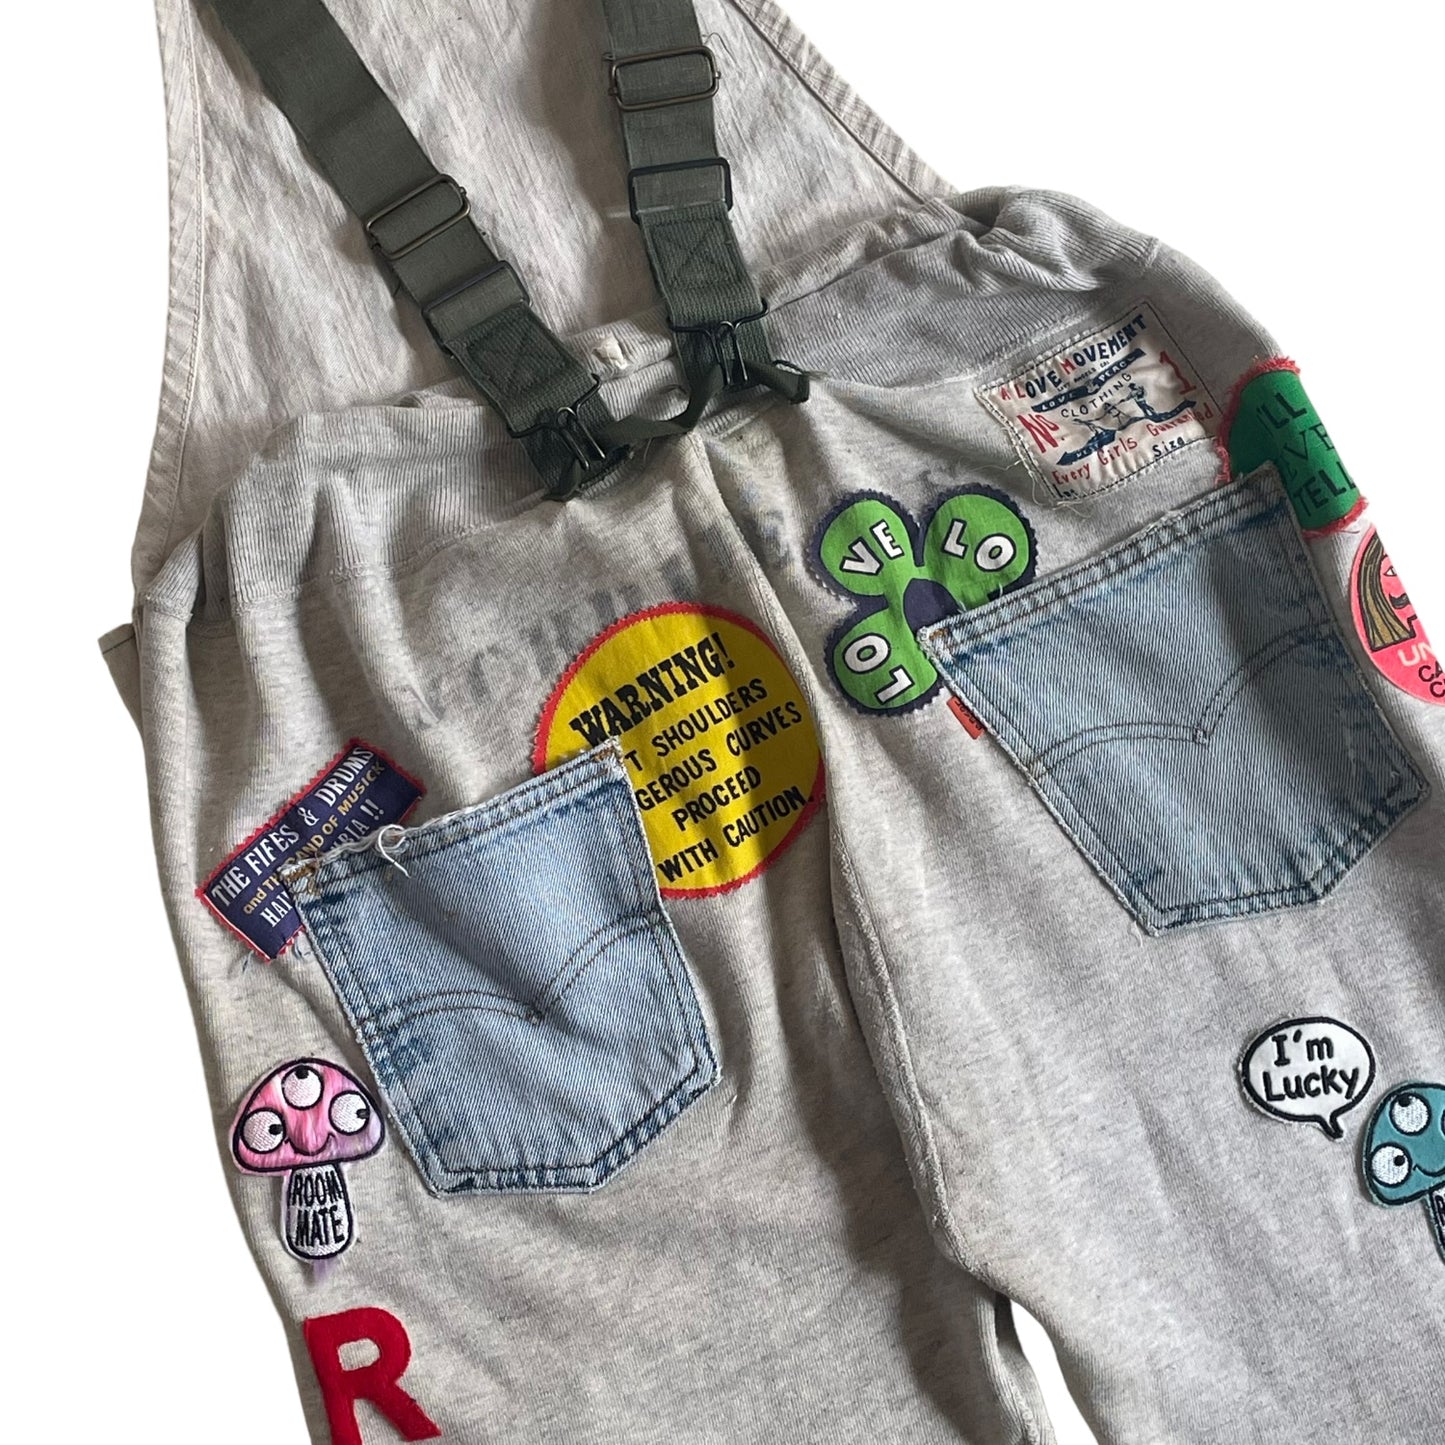 ALM original recycled vintage sweatpants and apron overall